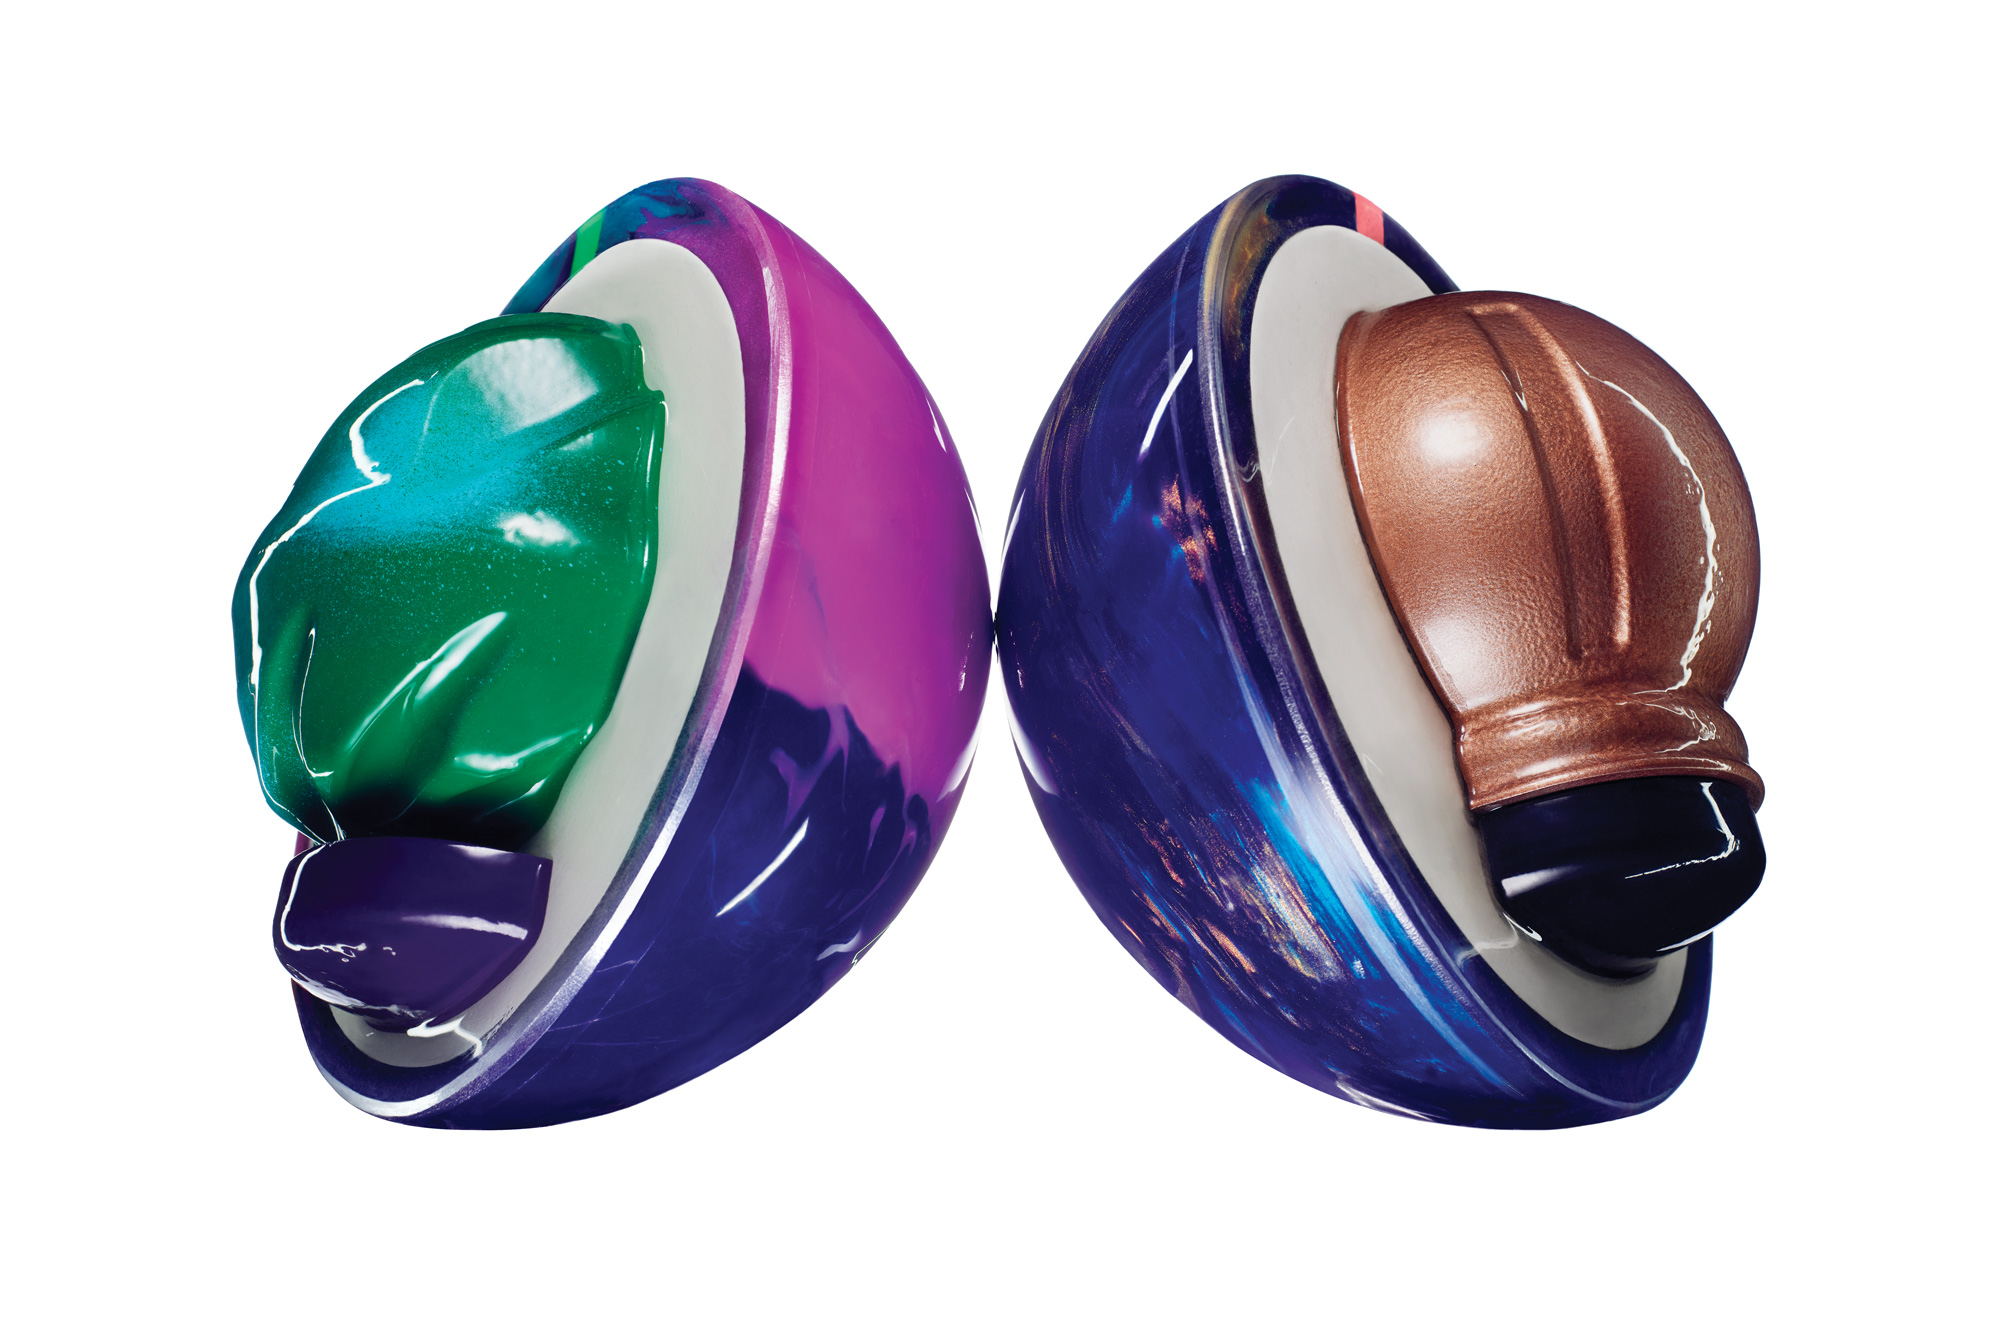 the-insides-of-pro-bowling-balls-will-make-your-head-spin-popular-science